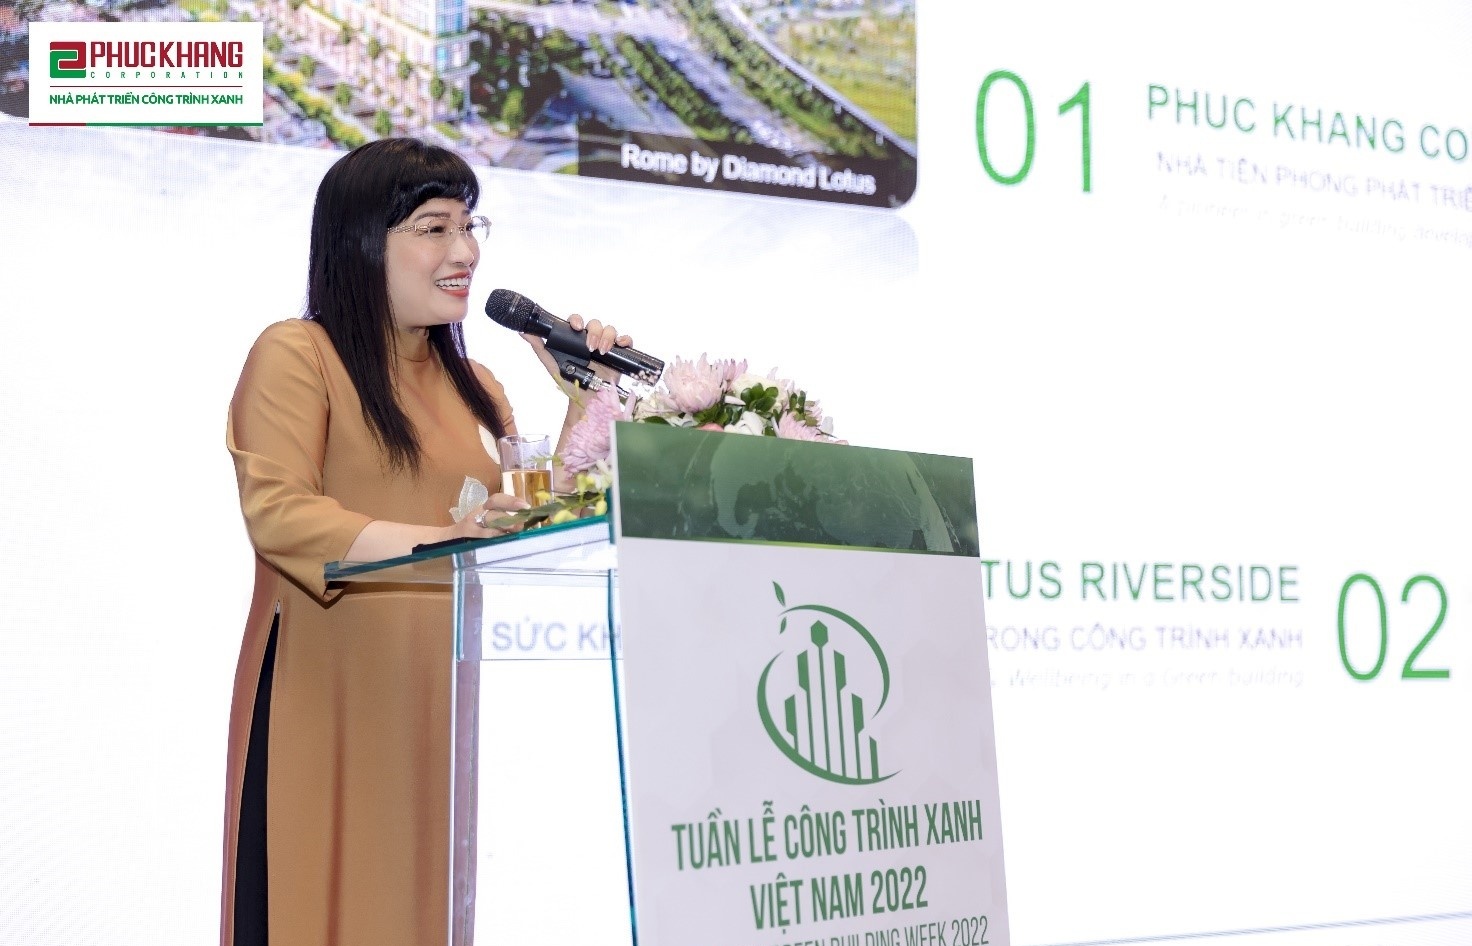 creating value for the community by going green phuc khang corporation ceo